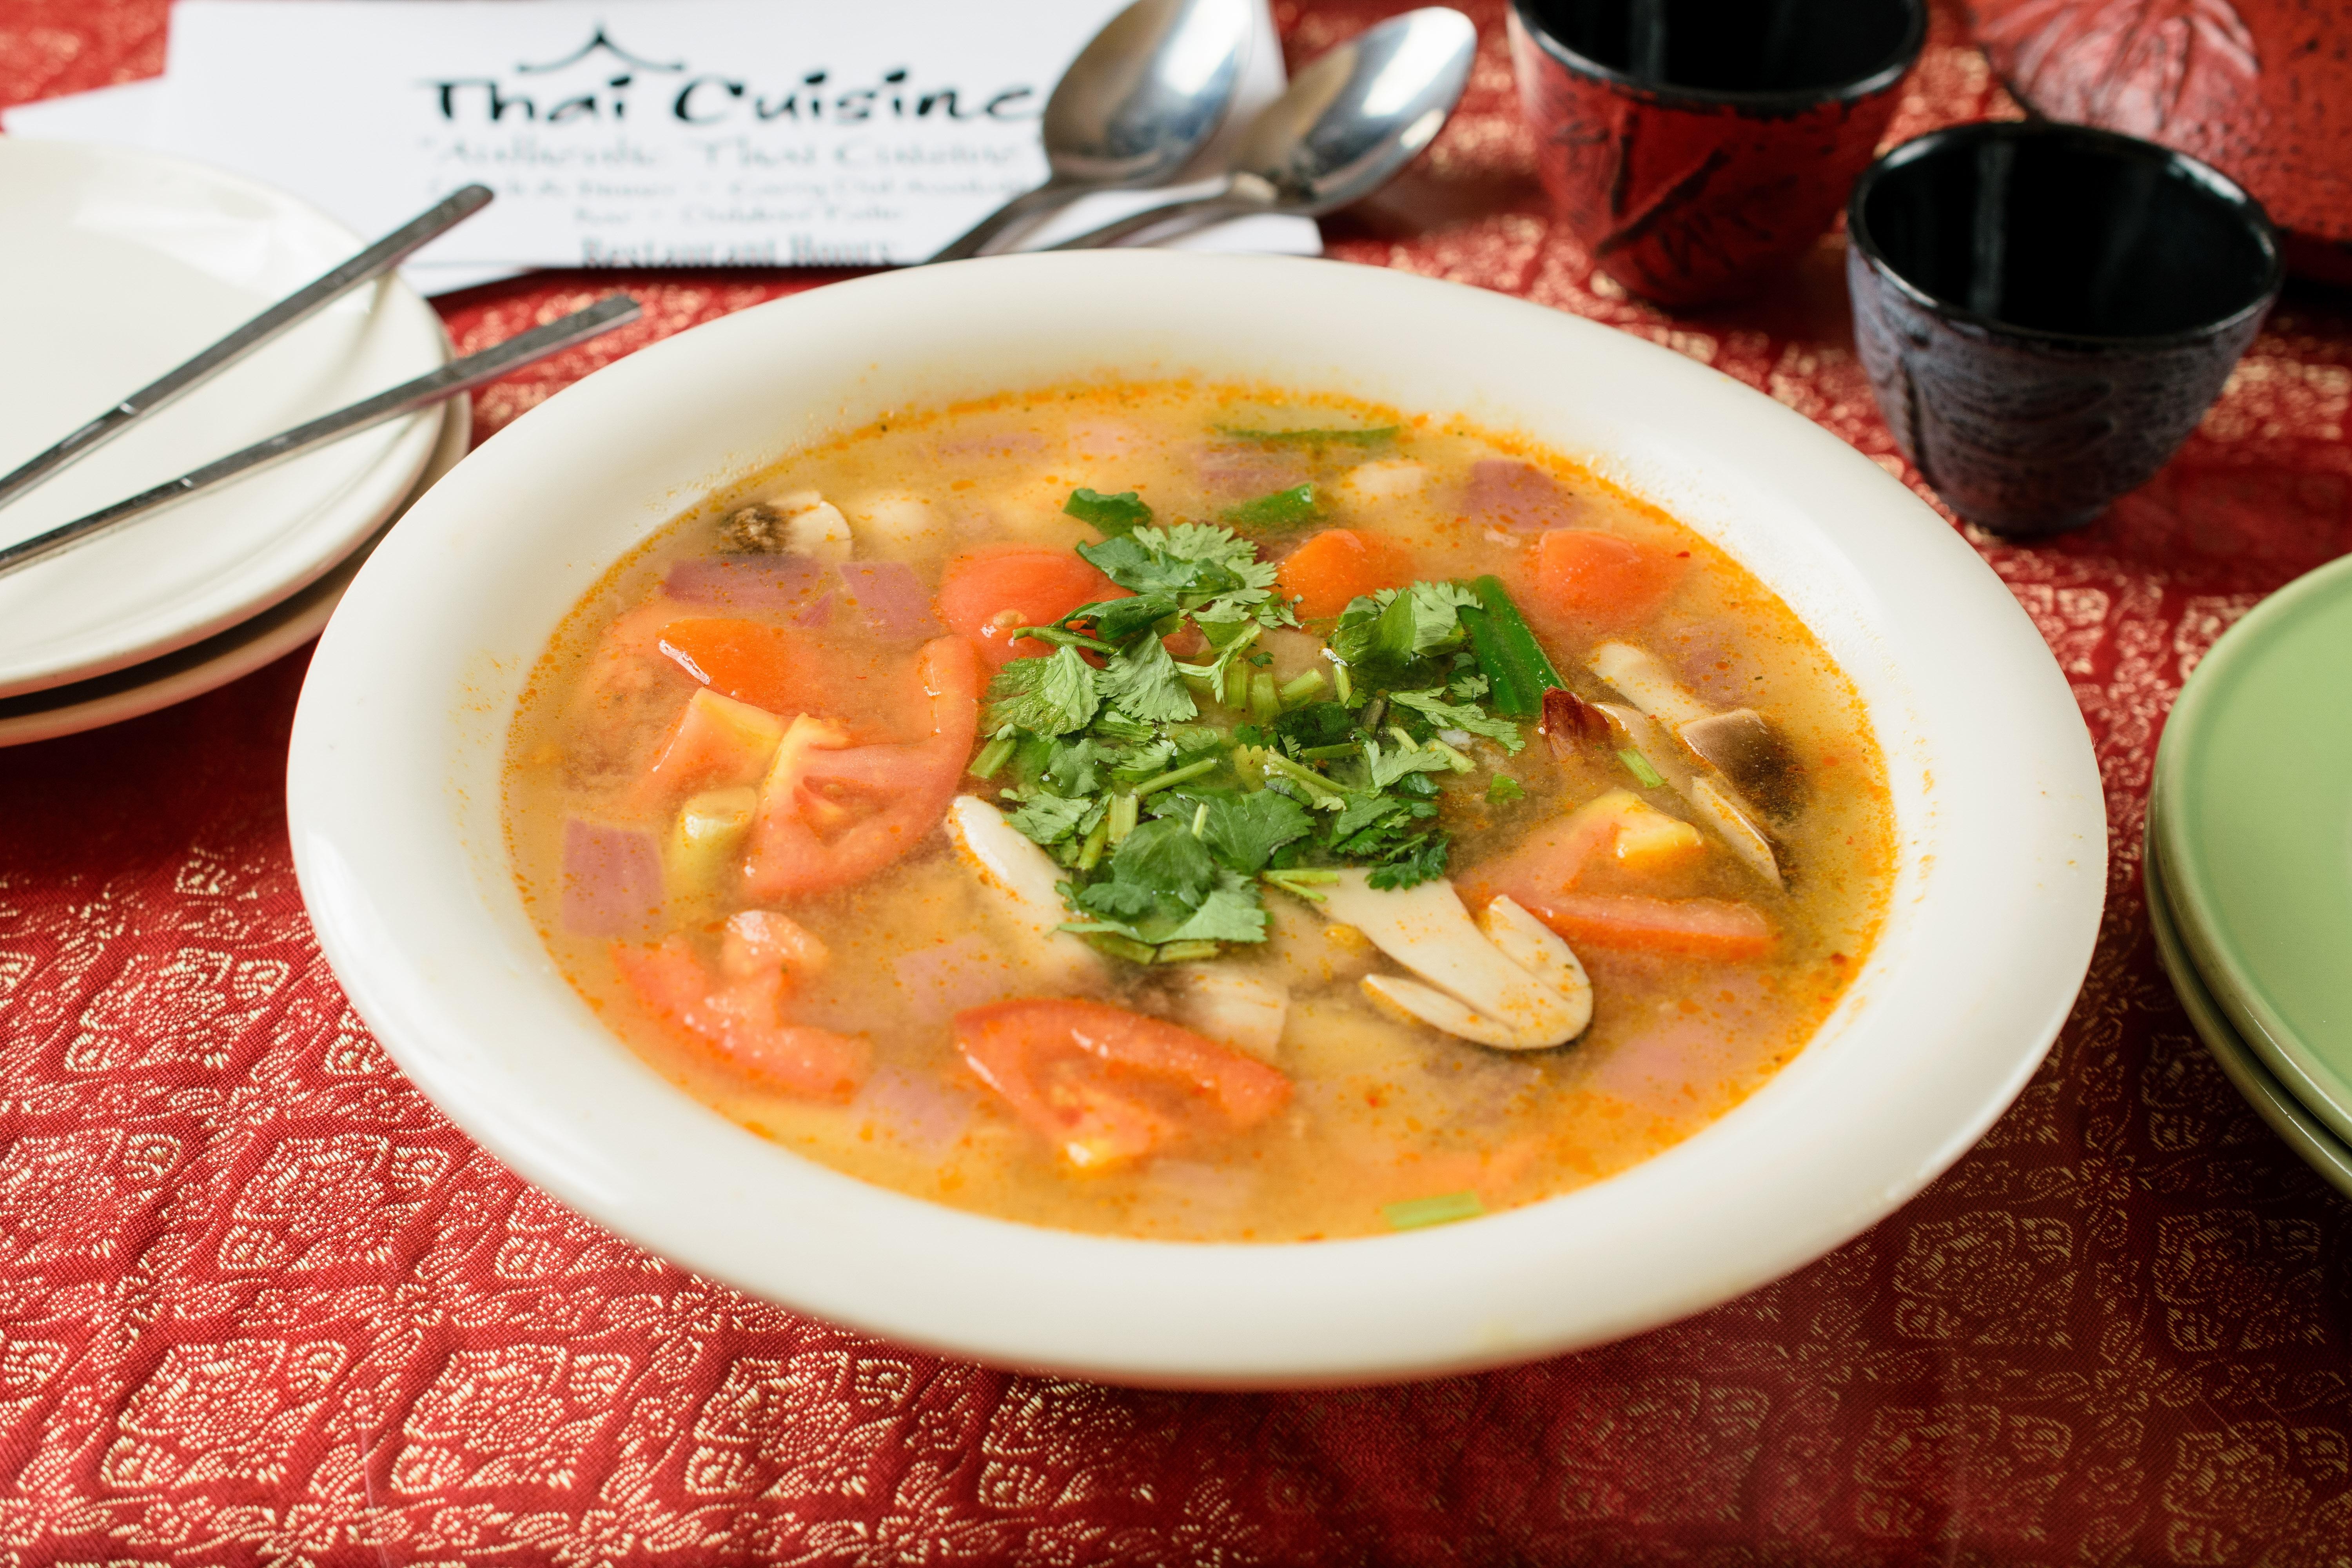 Tom Yum (Spicy & Sour Soup)